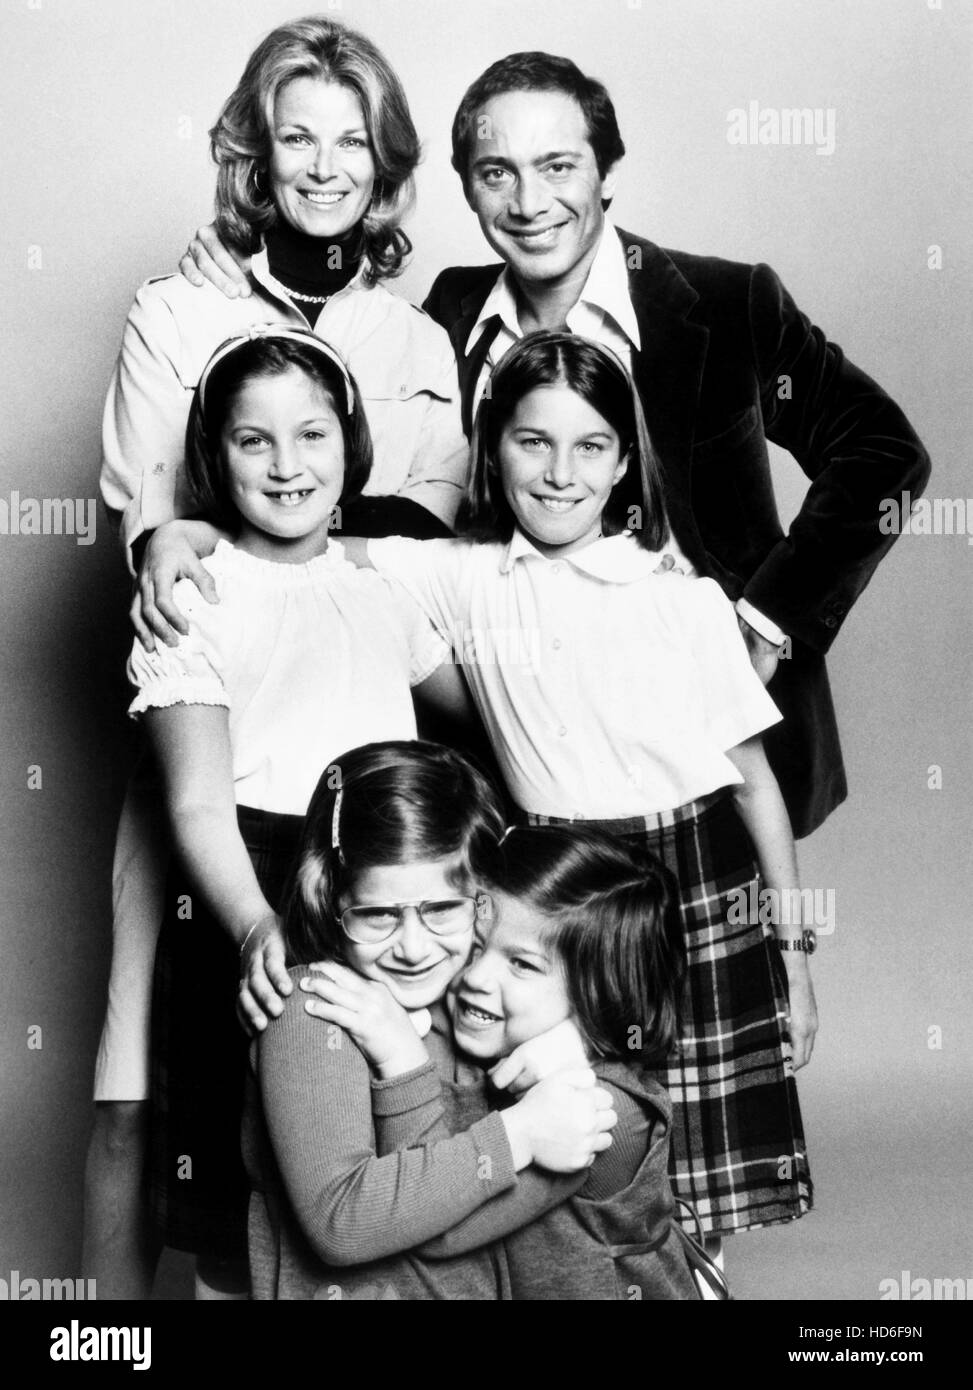 THE PAUL ANKA SPECIAL, Paul Anka, top right, with his wife, Anne Anka, top  left, and their daughters, clockwise from bottom Stock Photo - Alamy